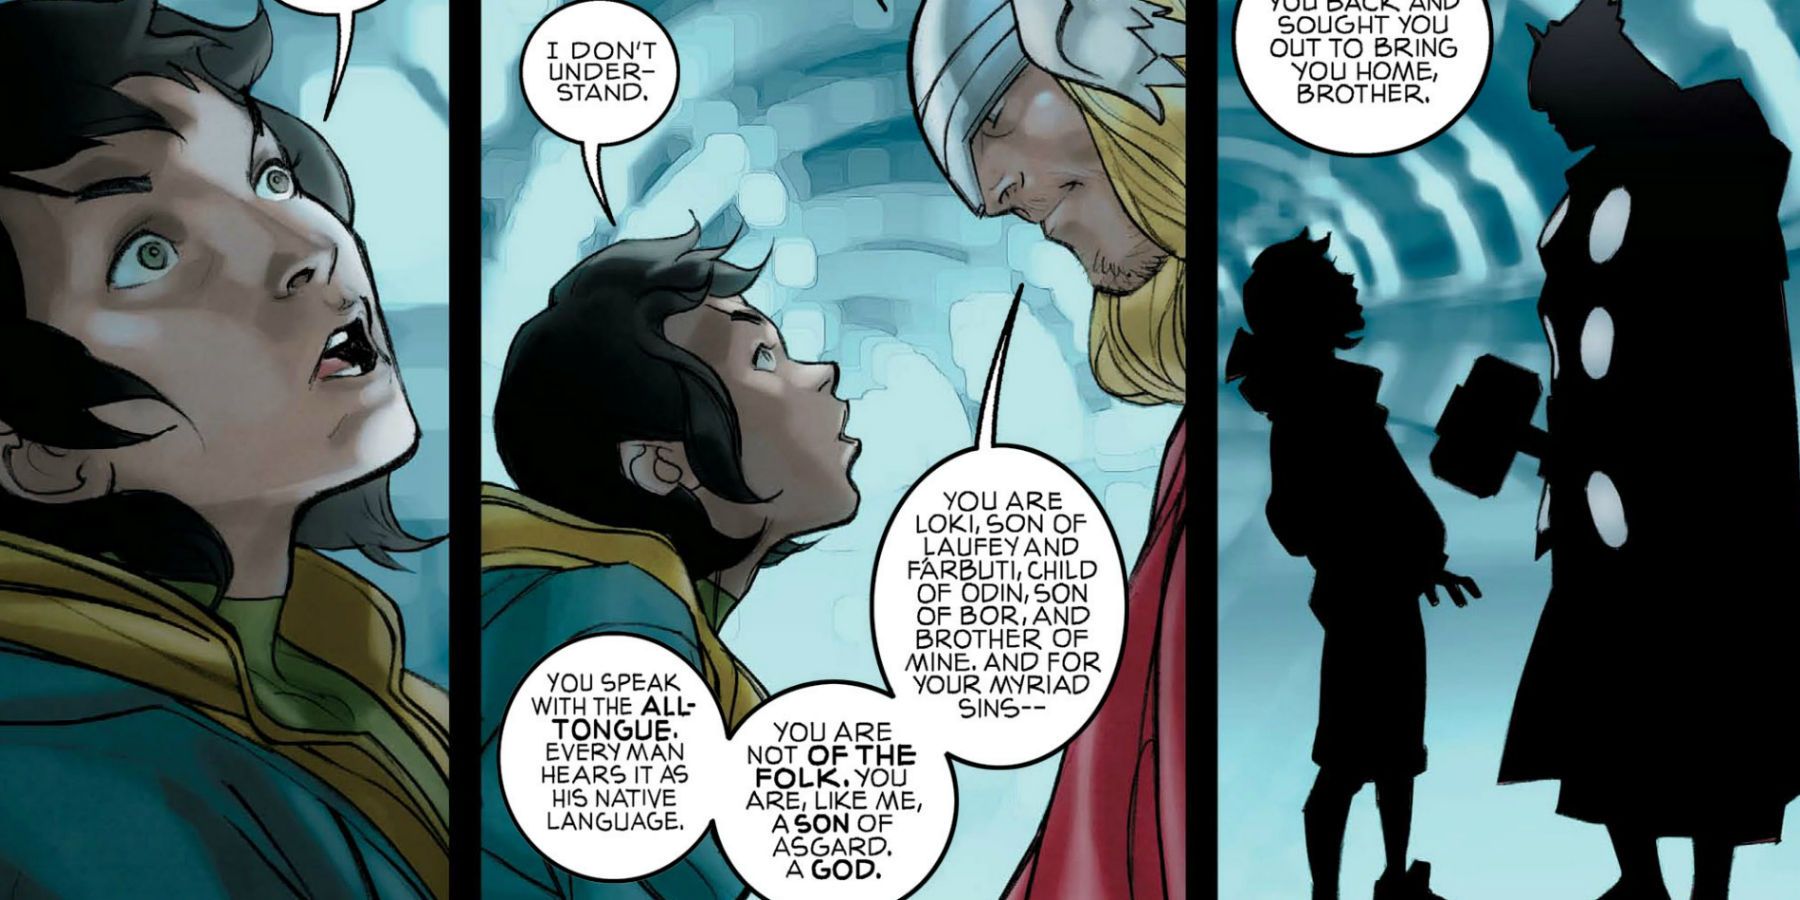 Thor tells Loki about All-Tongue